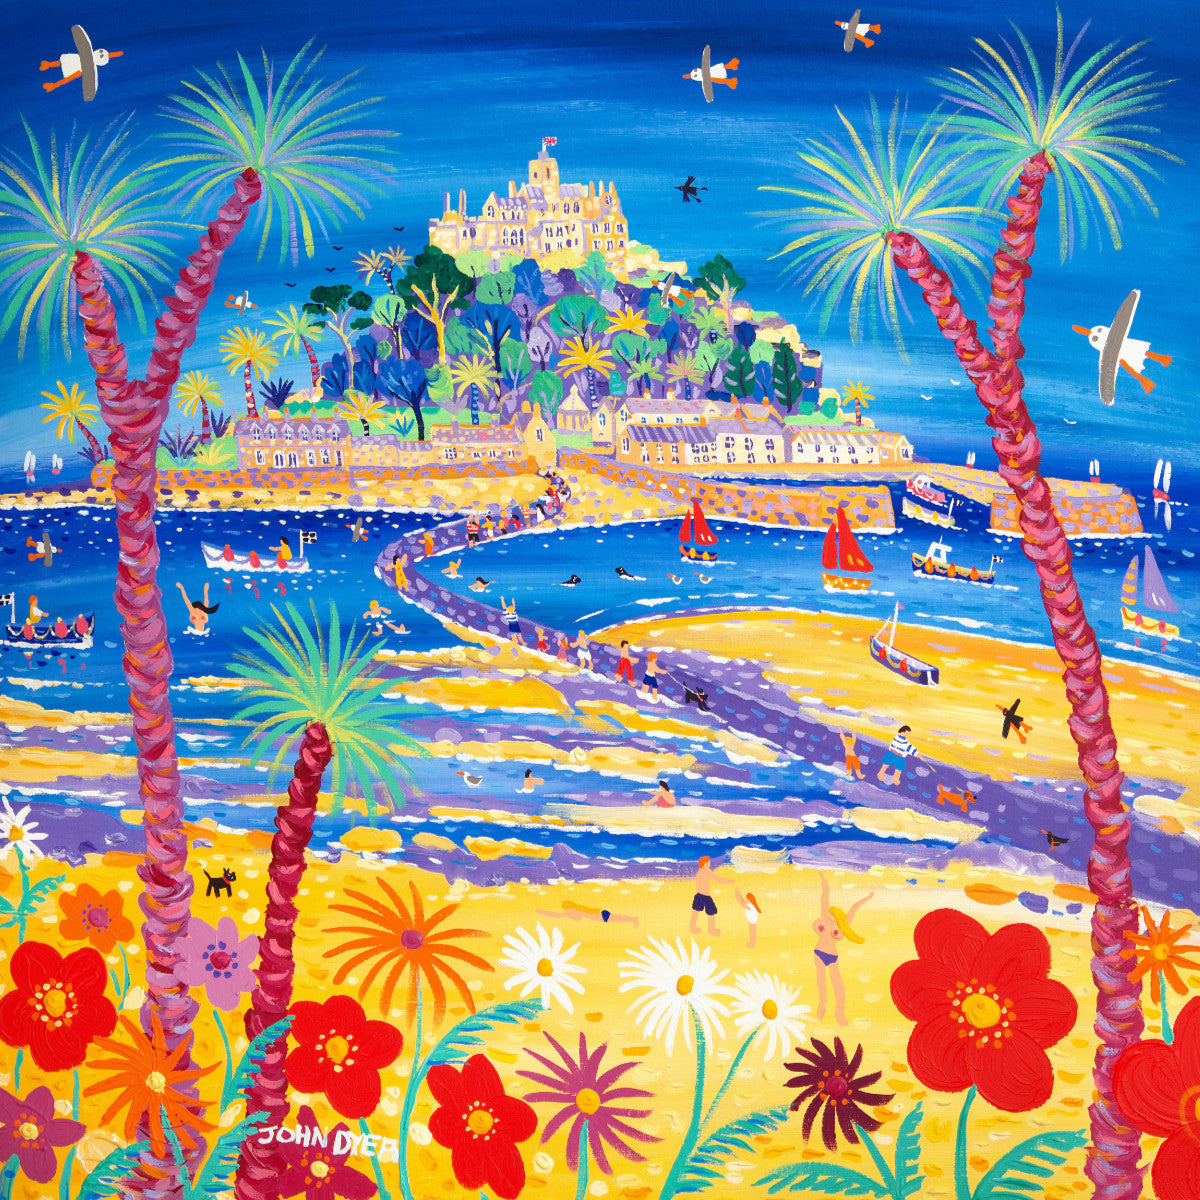 Signed Limited Edition Print by Cornish Artist John Dyer. &#39;Incoming Tide, St Michael&#39;s Mount&#39;. Cornwall Art Gallery Print